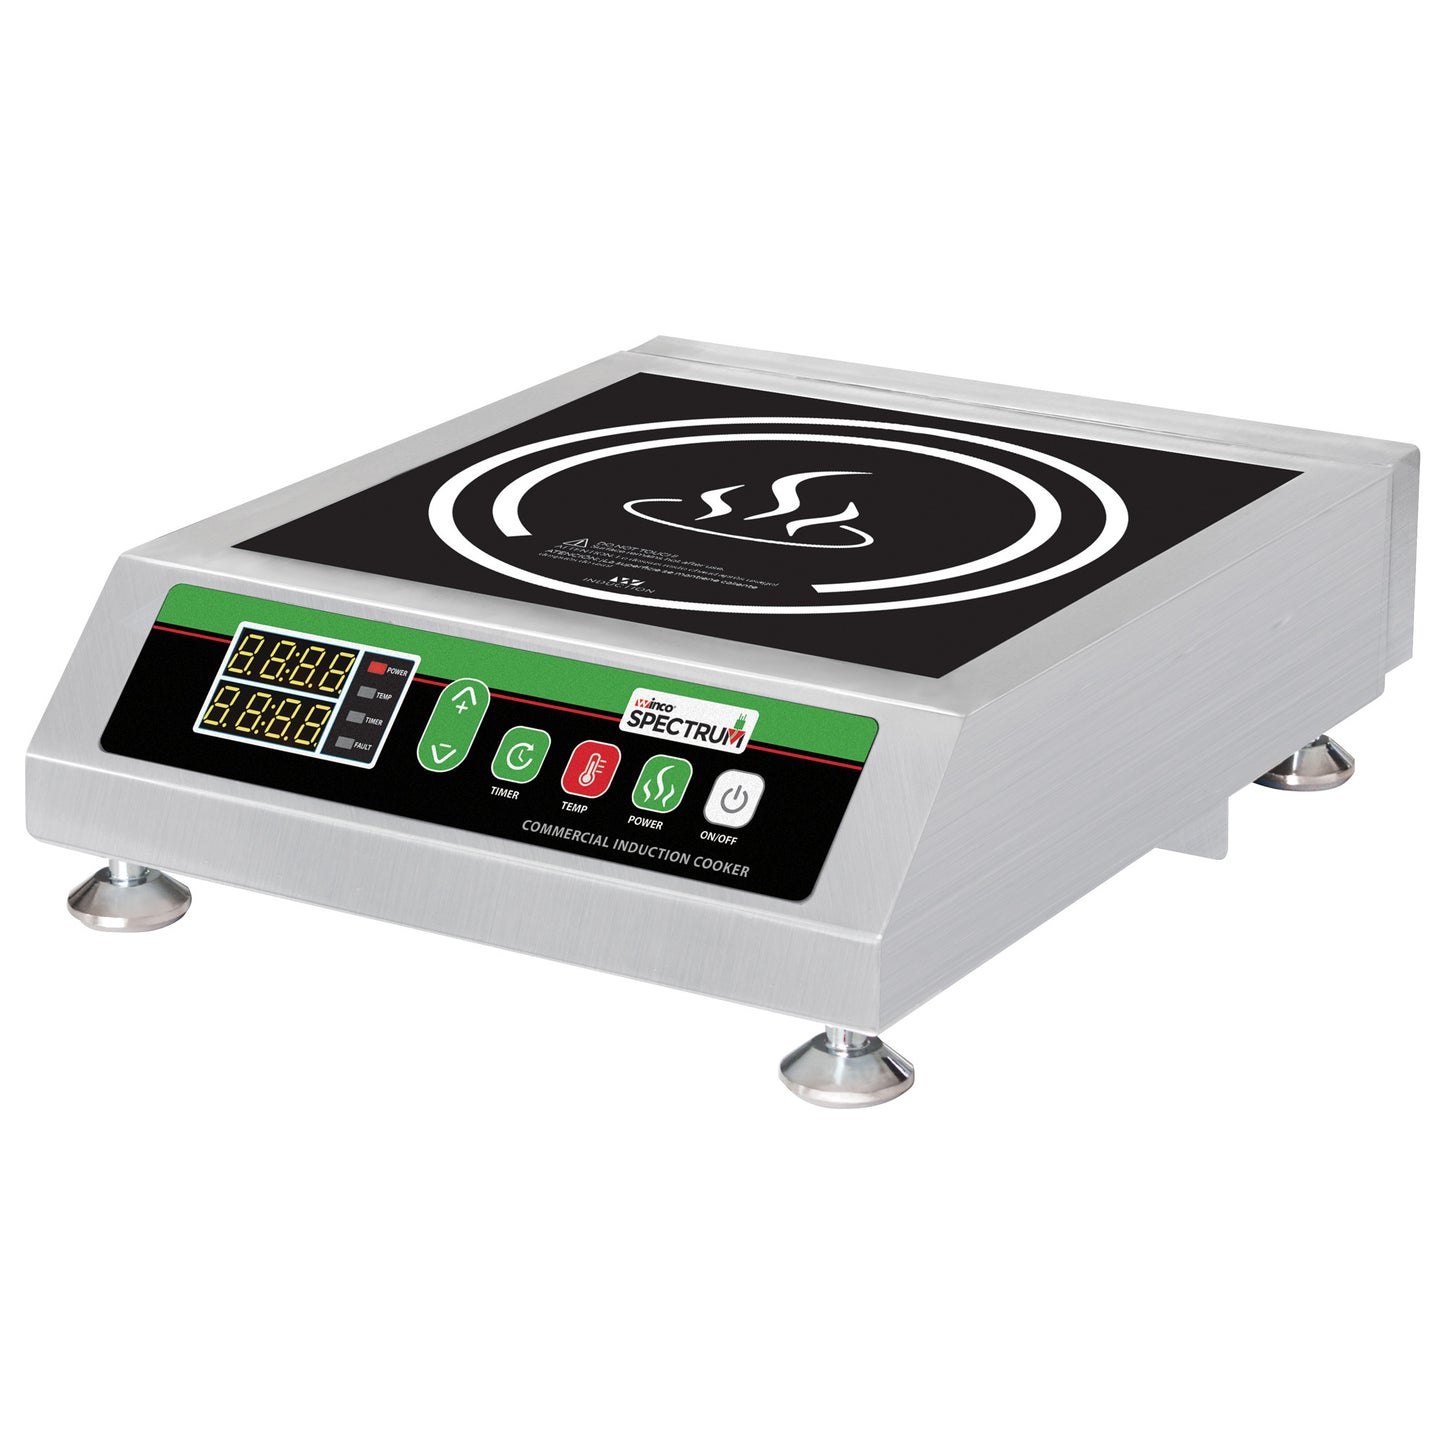 EICS-18C - Spectrum Countertop Induction Cookers - 1800 Watts (Canada only)